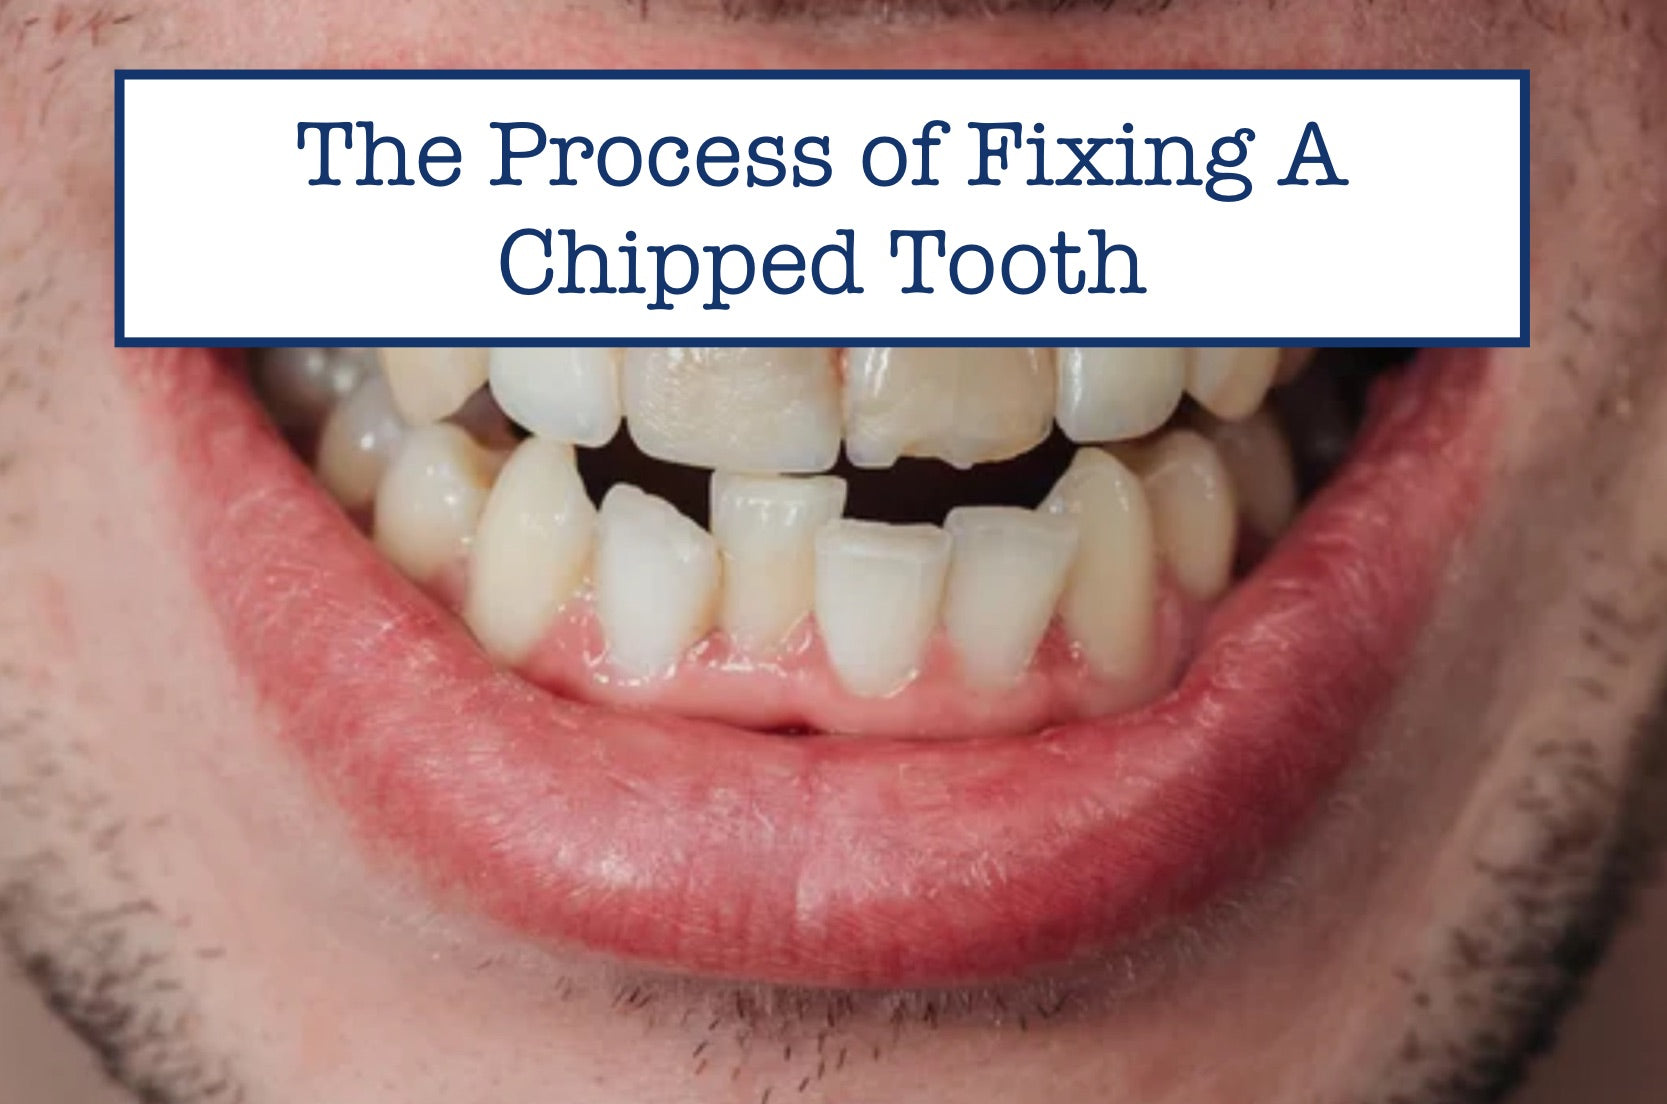 The Process of Fixing A Chipped Tooth